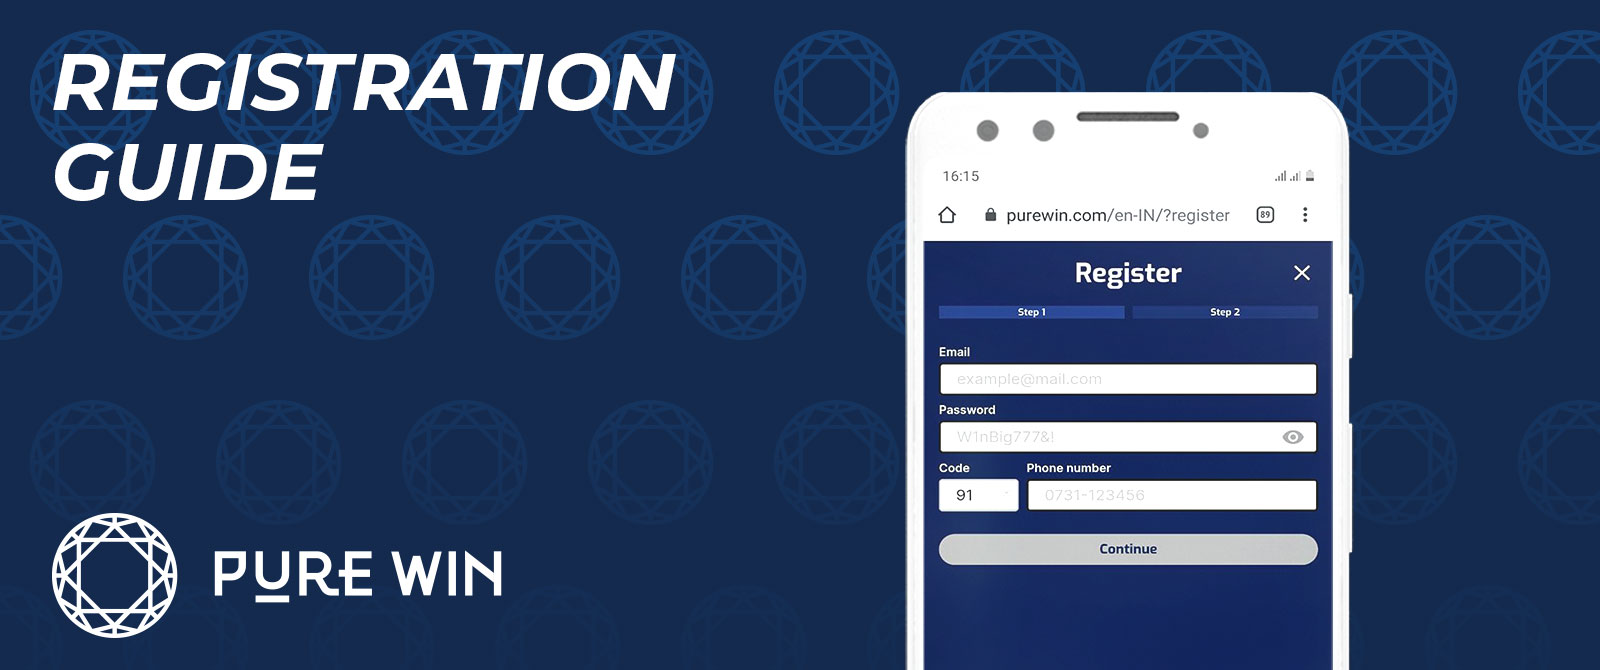 A detailed guide to registration on Purewin on a mobile device.